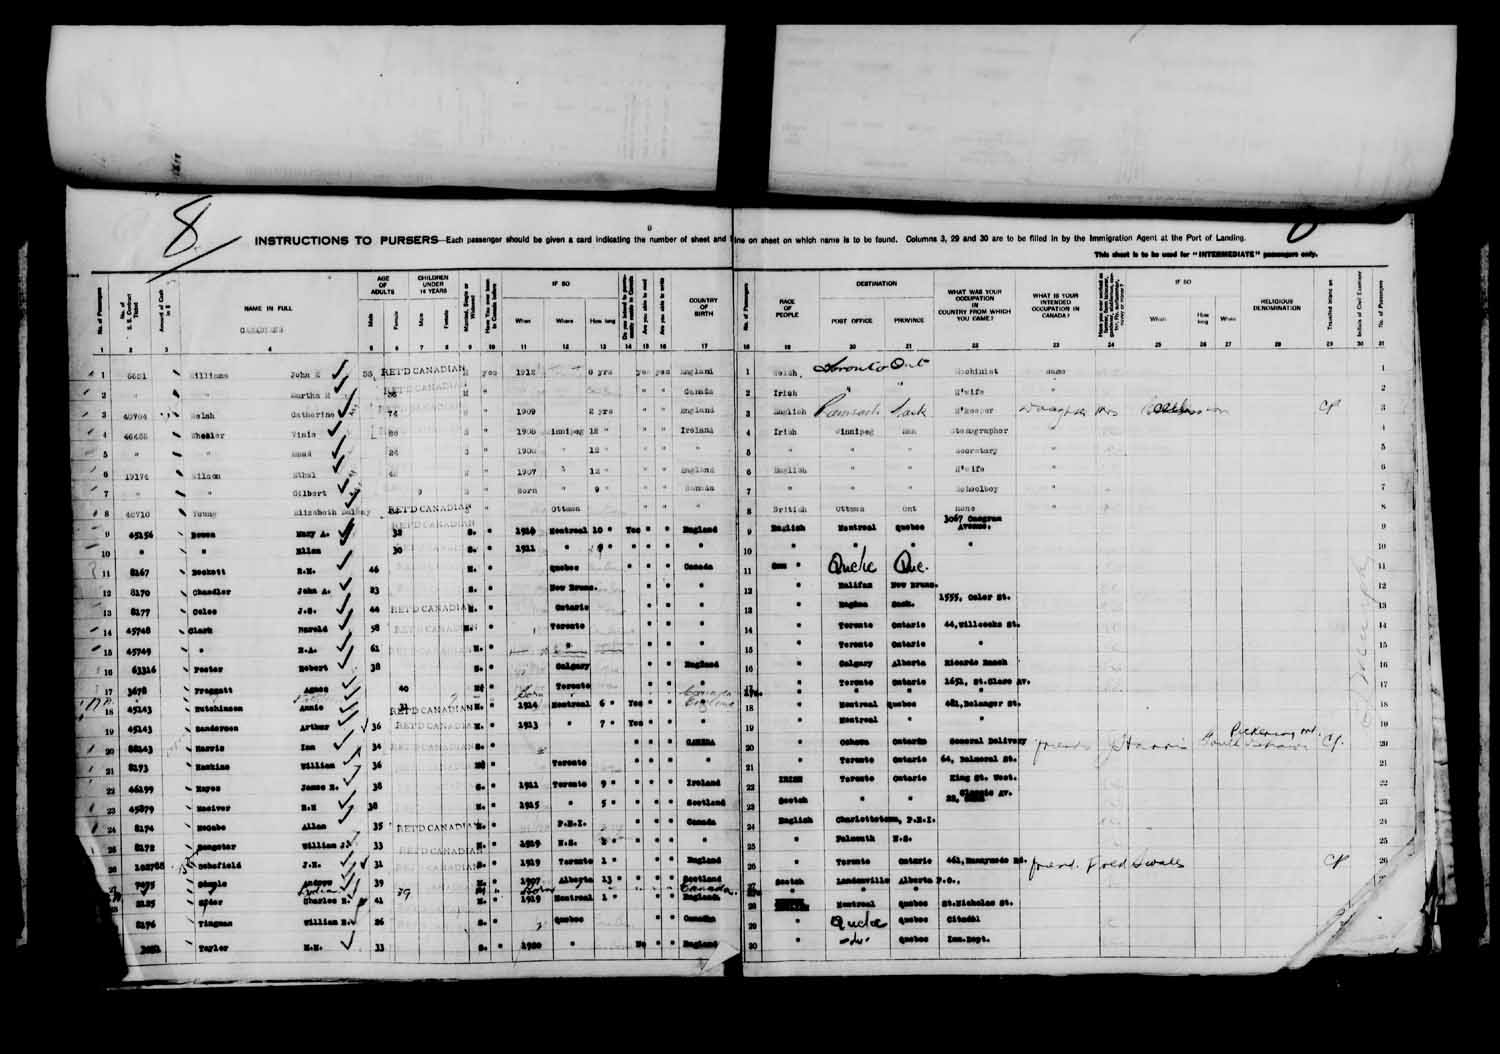 Digitized page of Passenger Lists for Image No.: e003610615